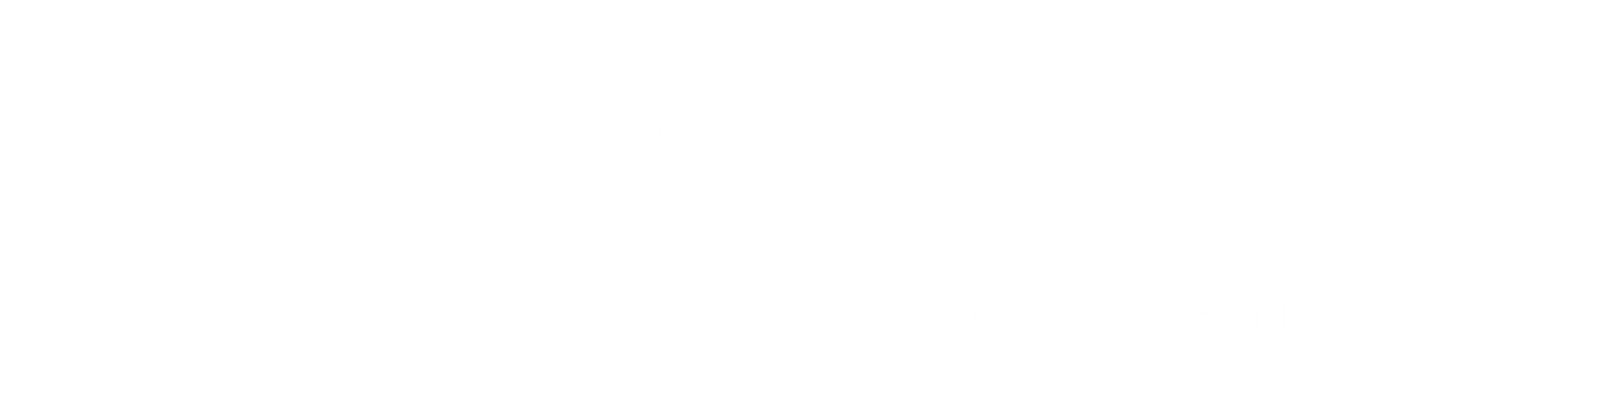 joicy nails spa & academy